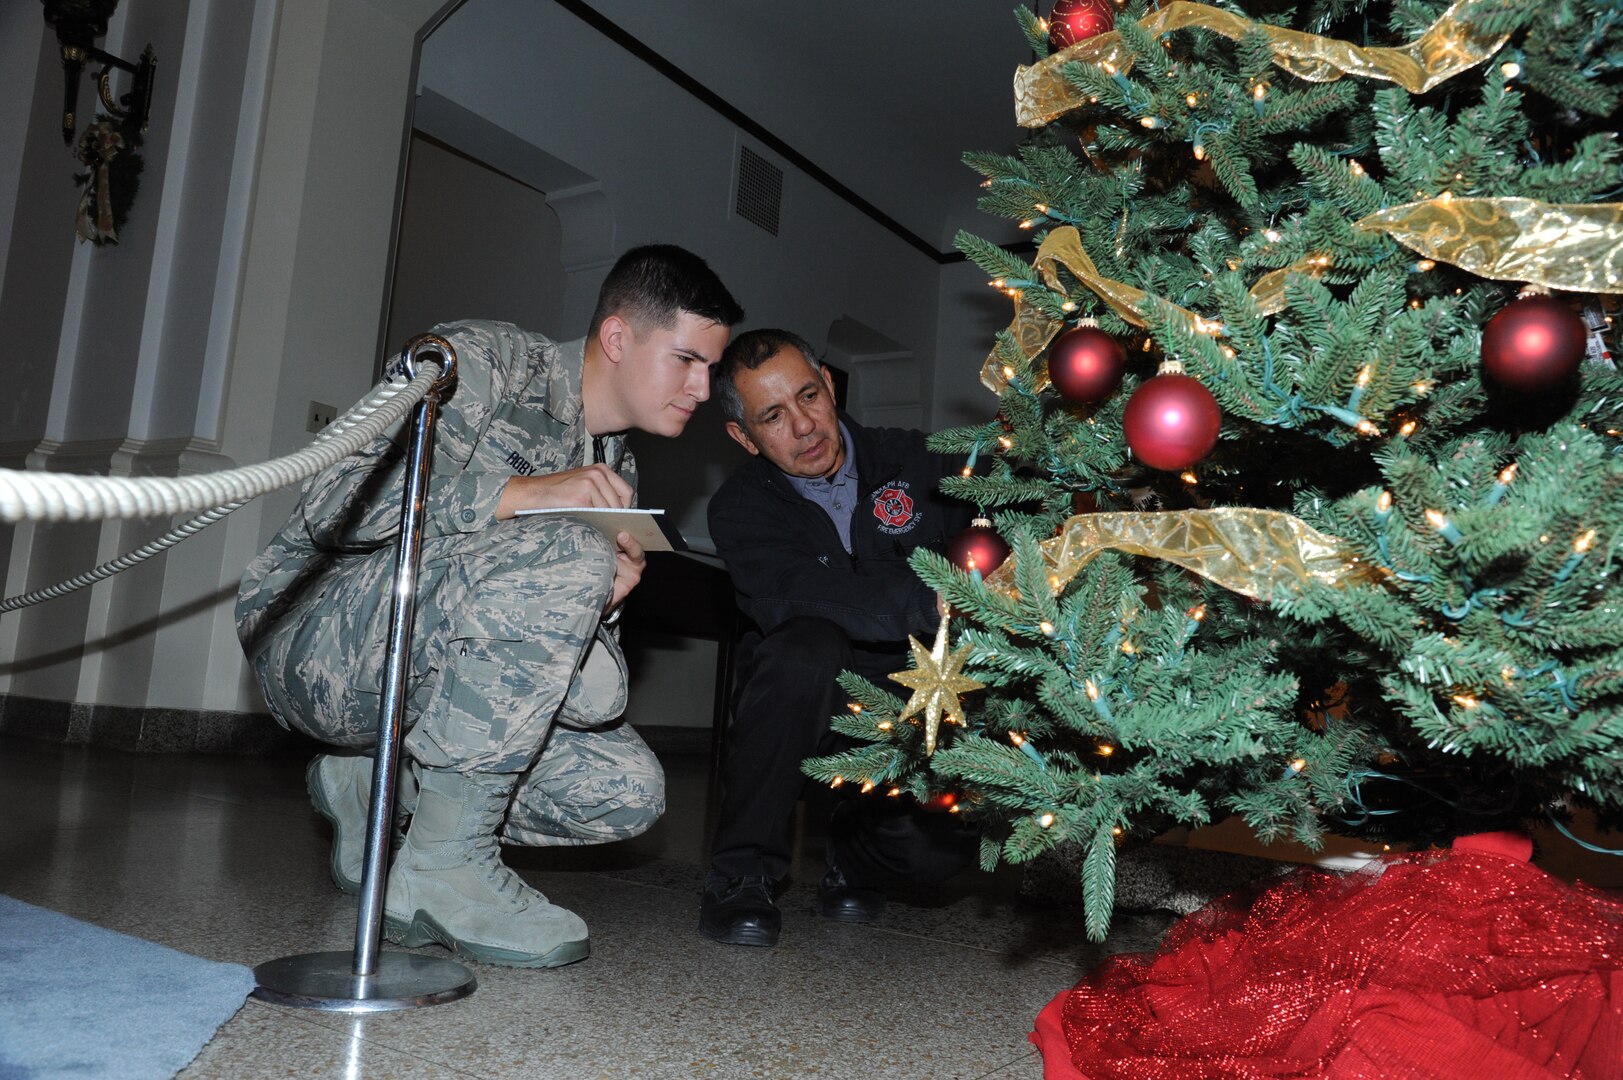 Staff Sgt. Allen Roby and Jesus Lopez, 902nd Civil Engineer Fire Department inspectors, perform a safety inspection on the holiday tree in the Joint Base San Antonio-Randolph Taj Mahal.(U.S. Air Force photo by Rich McFadden)